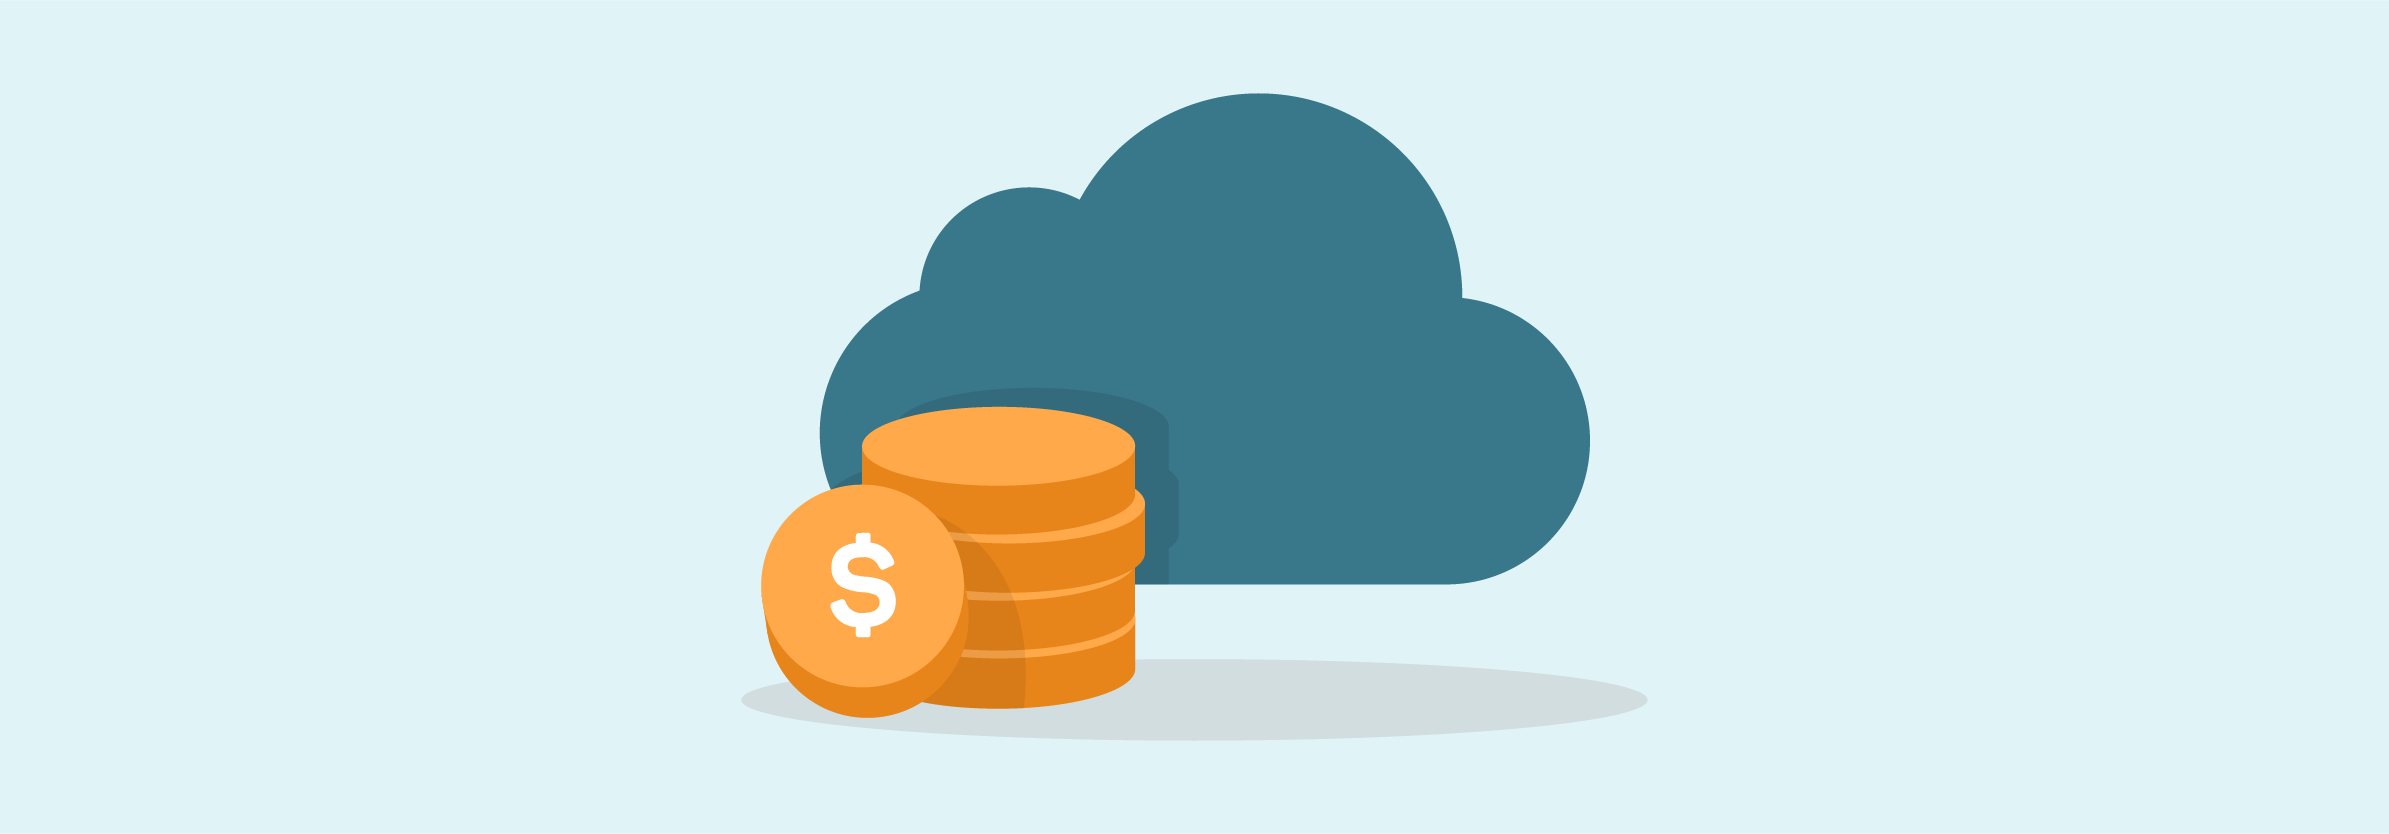 Cloud Cost Optimization benefits for Magento AWS hosting